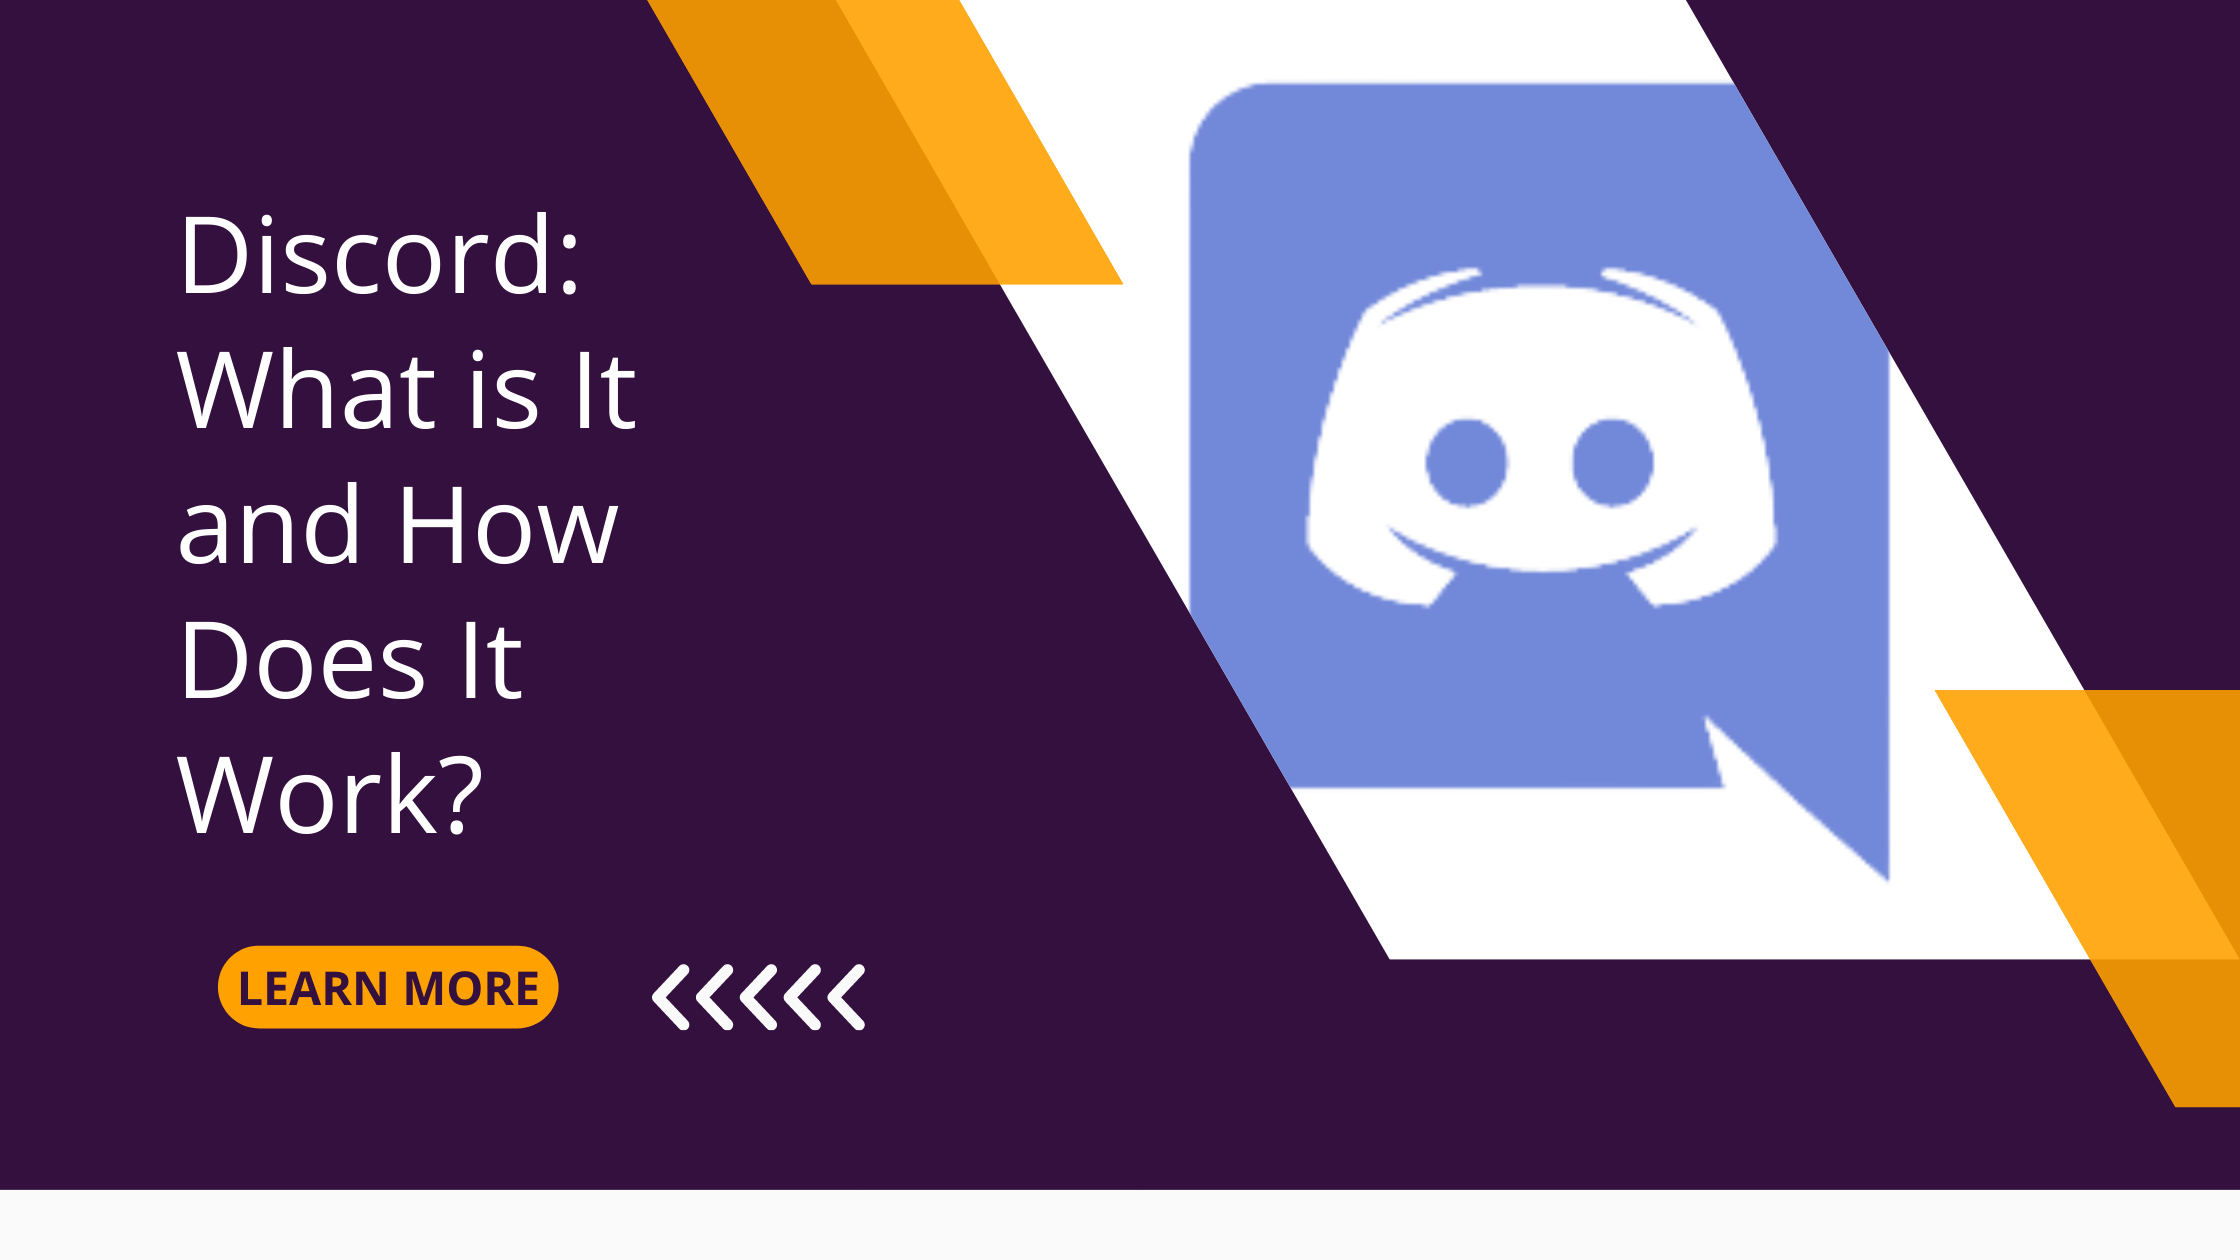 Discord: What is It and How Does It Work?